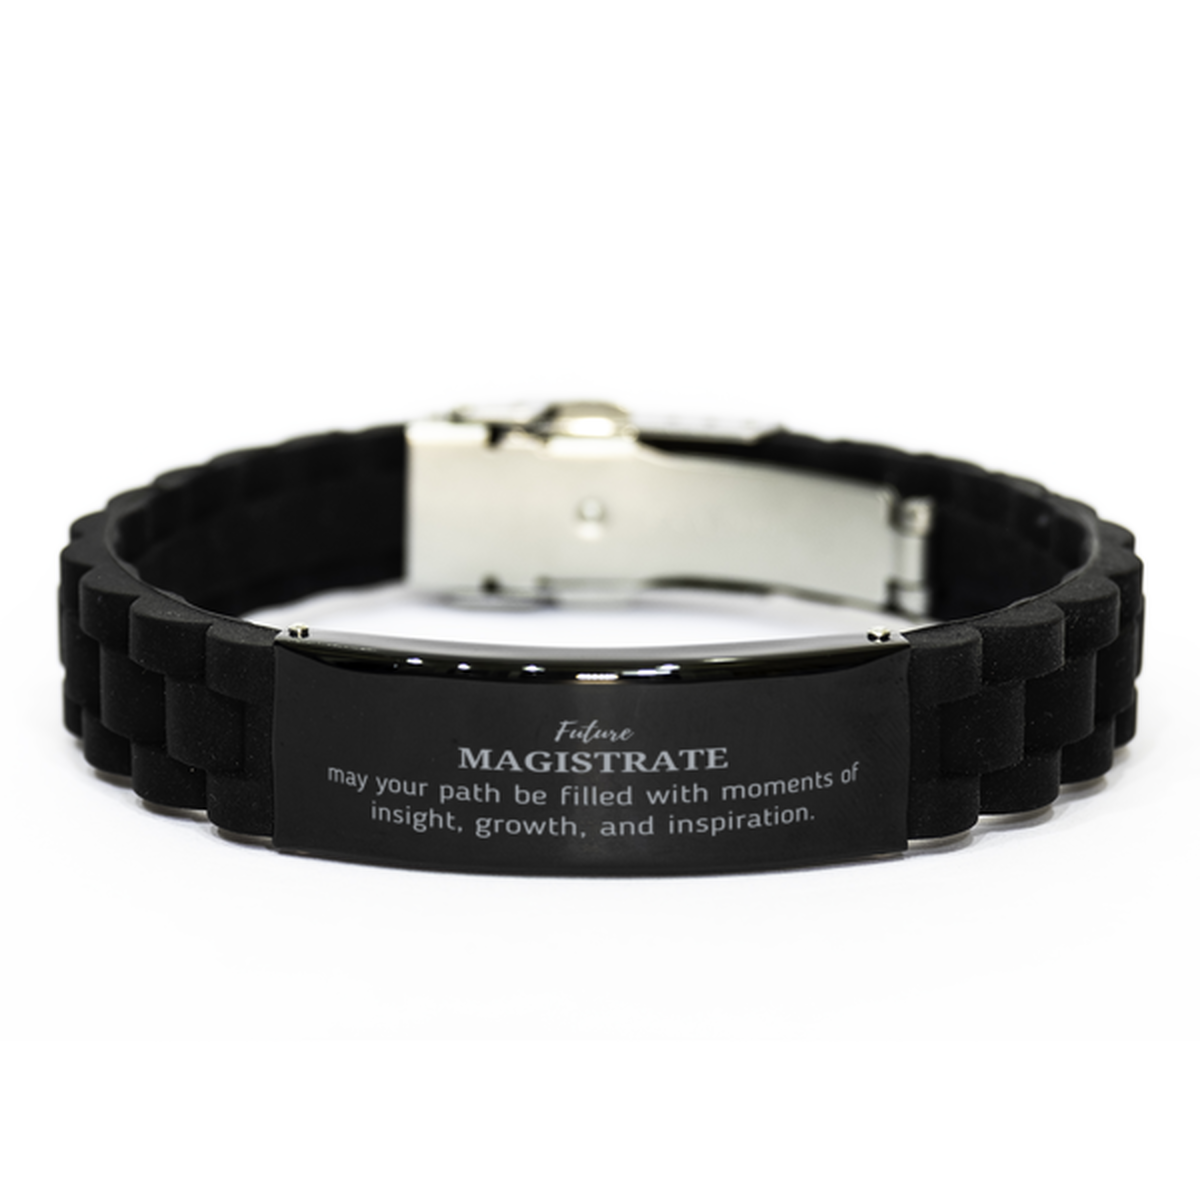 Future Magistrate Gifts, May your path be filled with moments of insight, Graduation Gifts for New Magistrate, Christmas Unique Black Glidelock Clasp Bracelet For Men, Women, Friends